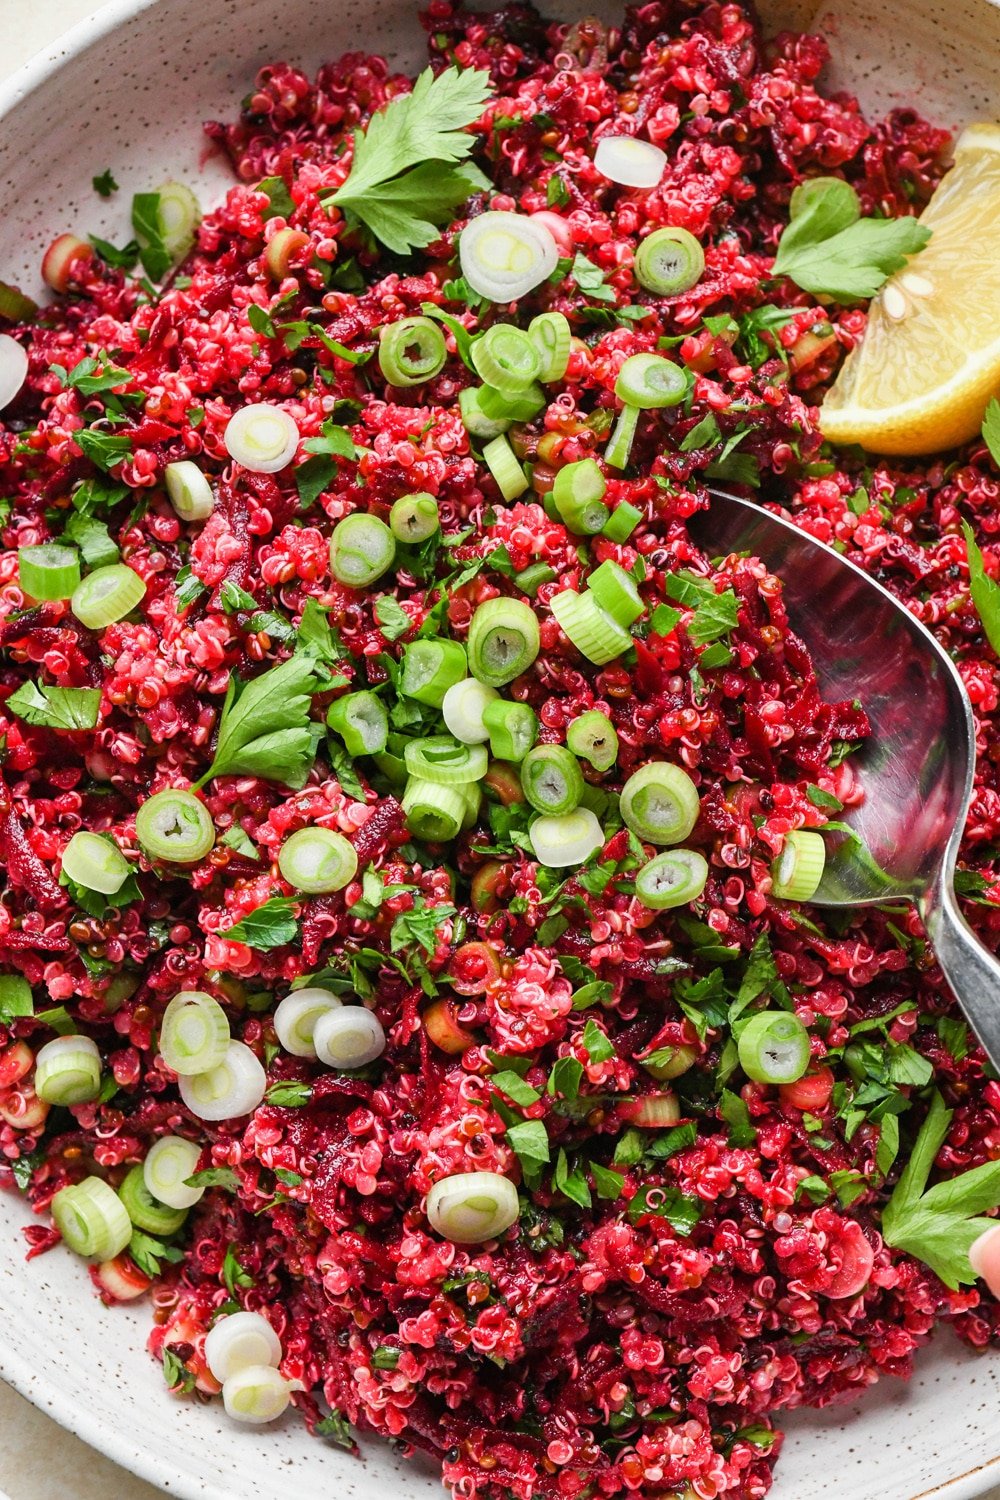 Quinoa and beet salad in a large shallow ceramic serving dish. The salad is garnished with sliced green onion, fresh chopped parsley, and lemon wedges on the side. A hand is scooping out a serving of the salad with a large spoon.